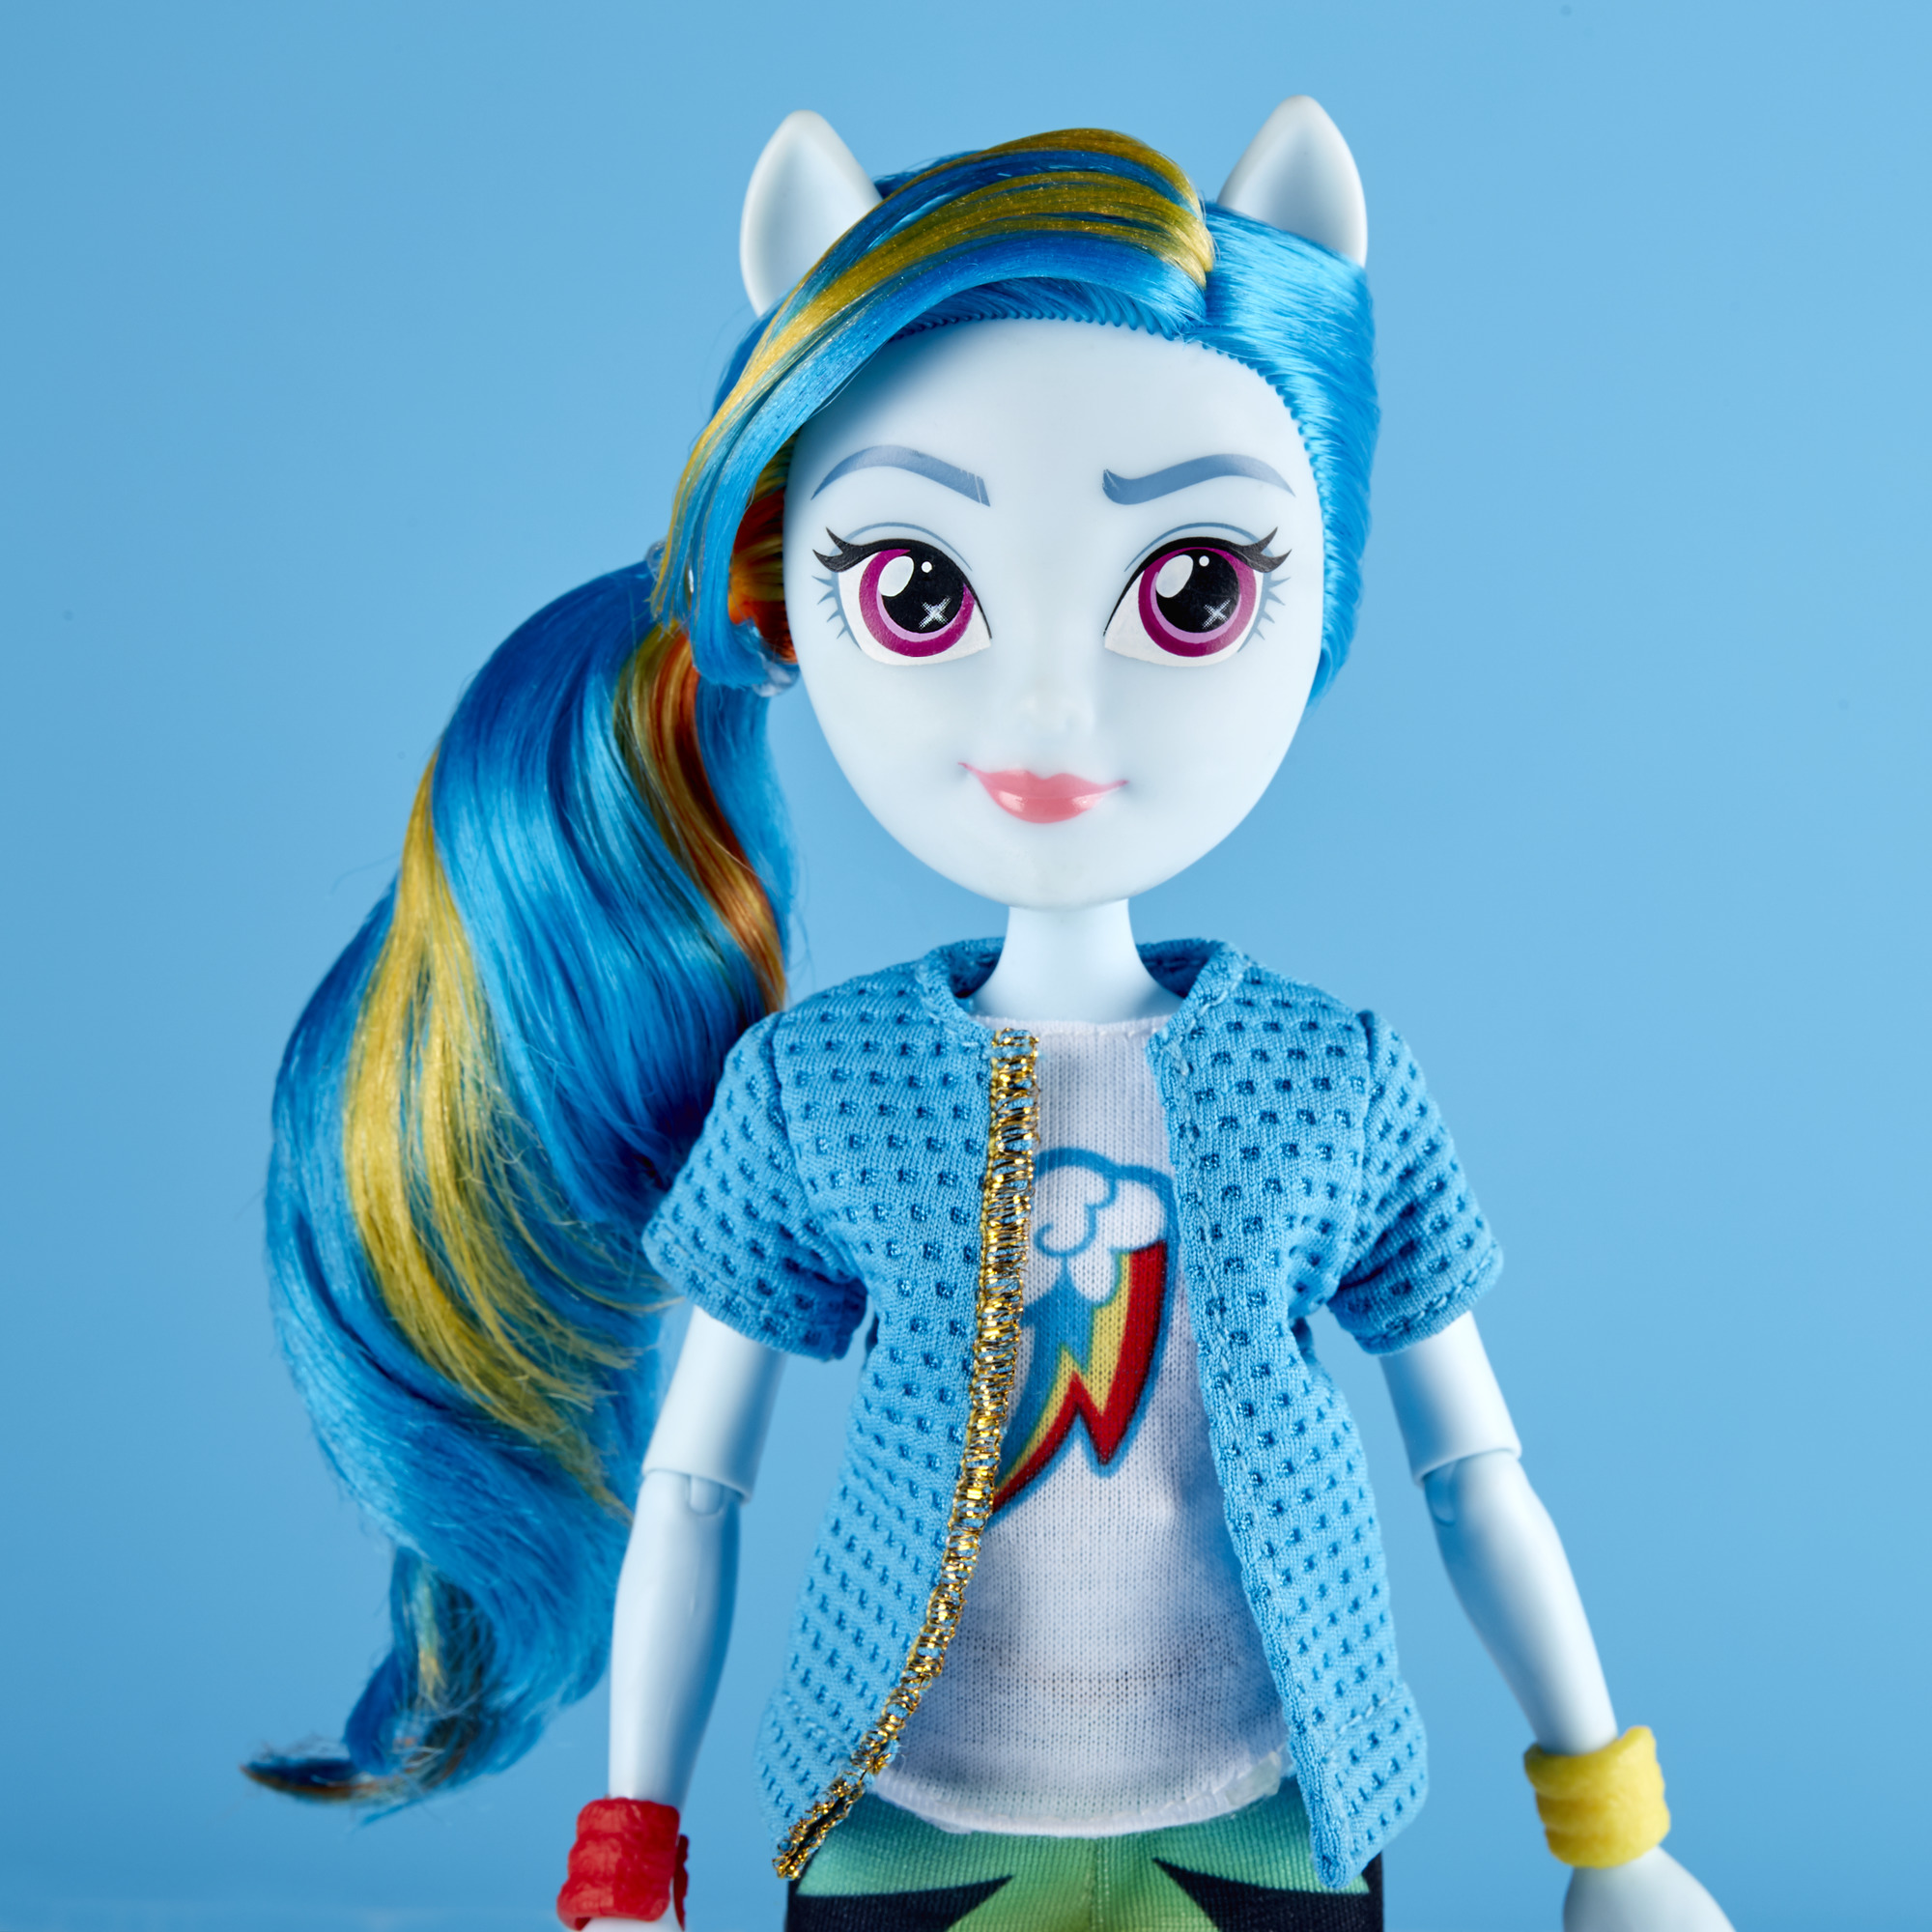 My Little Pony Equestria Girls Rainbow Dash Classic Style Doll - image 5 of 11